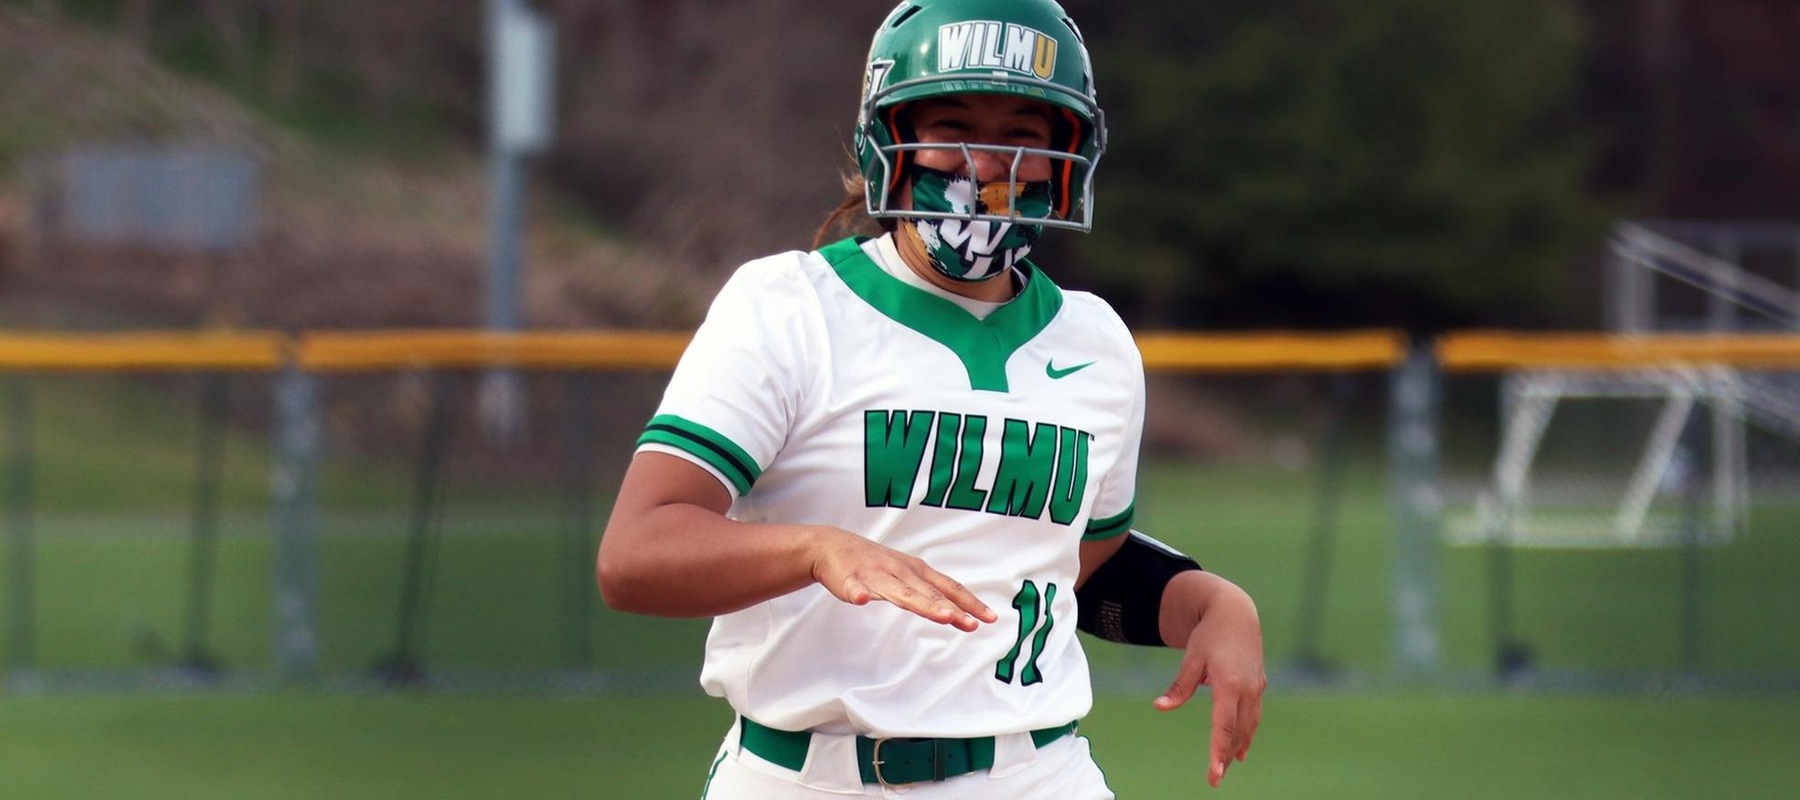 File Photo of Annie Davila trotting home following a homer at Felician. Copyright 2021; Wilmington University. All rights reserved. Photo by Dan Lauletta. March 27, 2021 at Felician.